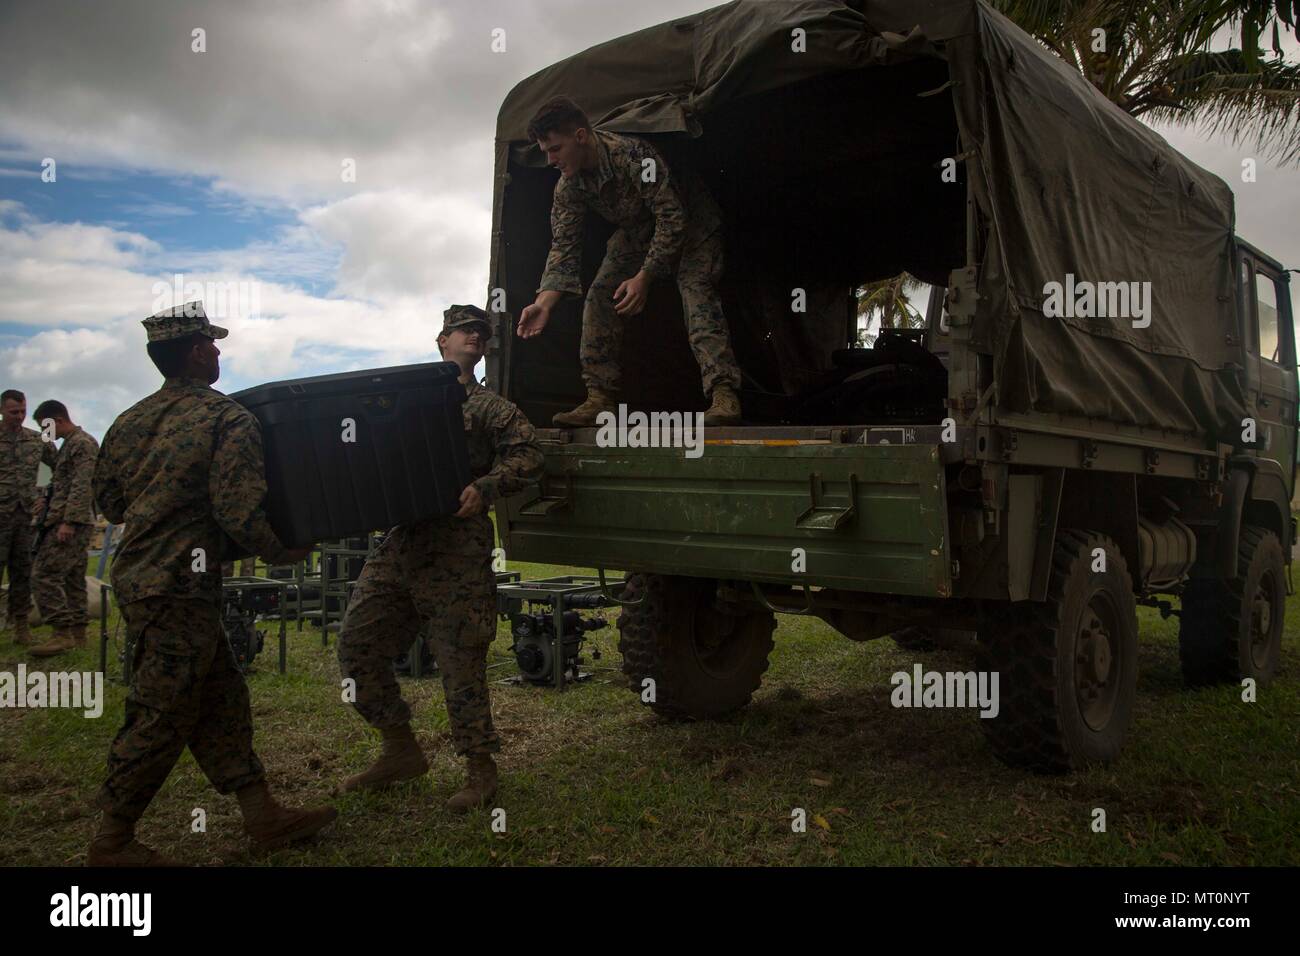 U.S. Marines with Task Force Koa Moana 17 load parts of a Light Weight Water Purification System onto a supply truck during Exercise TAFAKULA on Tongatapu Island, Tonga, July 17, 2017. Exercise TAFAKULA is designed to strengthen the military-to-military relations, infantry and combat training between Tonga’s His Majesty’s Armed Forces, French Army of New Caledonia, New Zealand Defense Force, and the United States Armed Forces.  (U.S. Marine Corps photo by MCIPAC Combat Camera Lance Cpl. Juan C. Bustos) Stock Photo